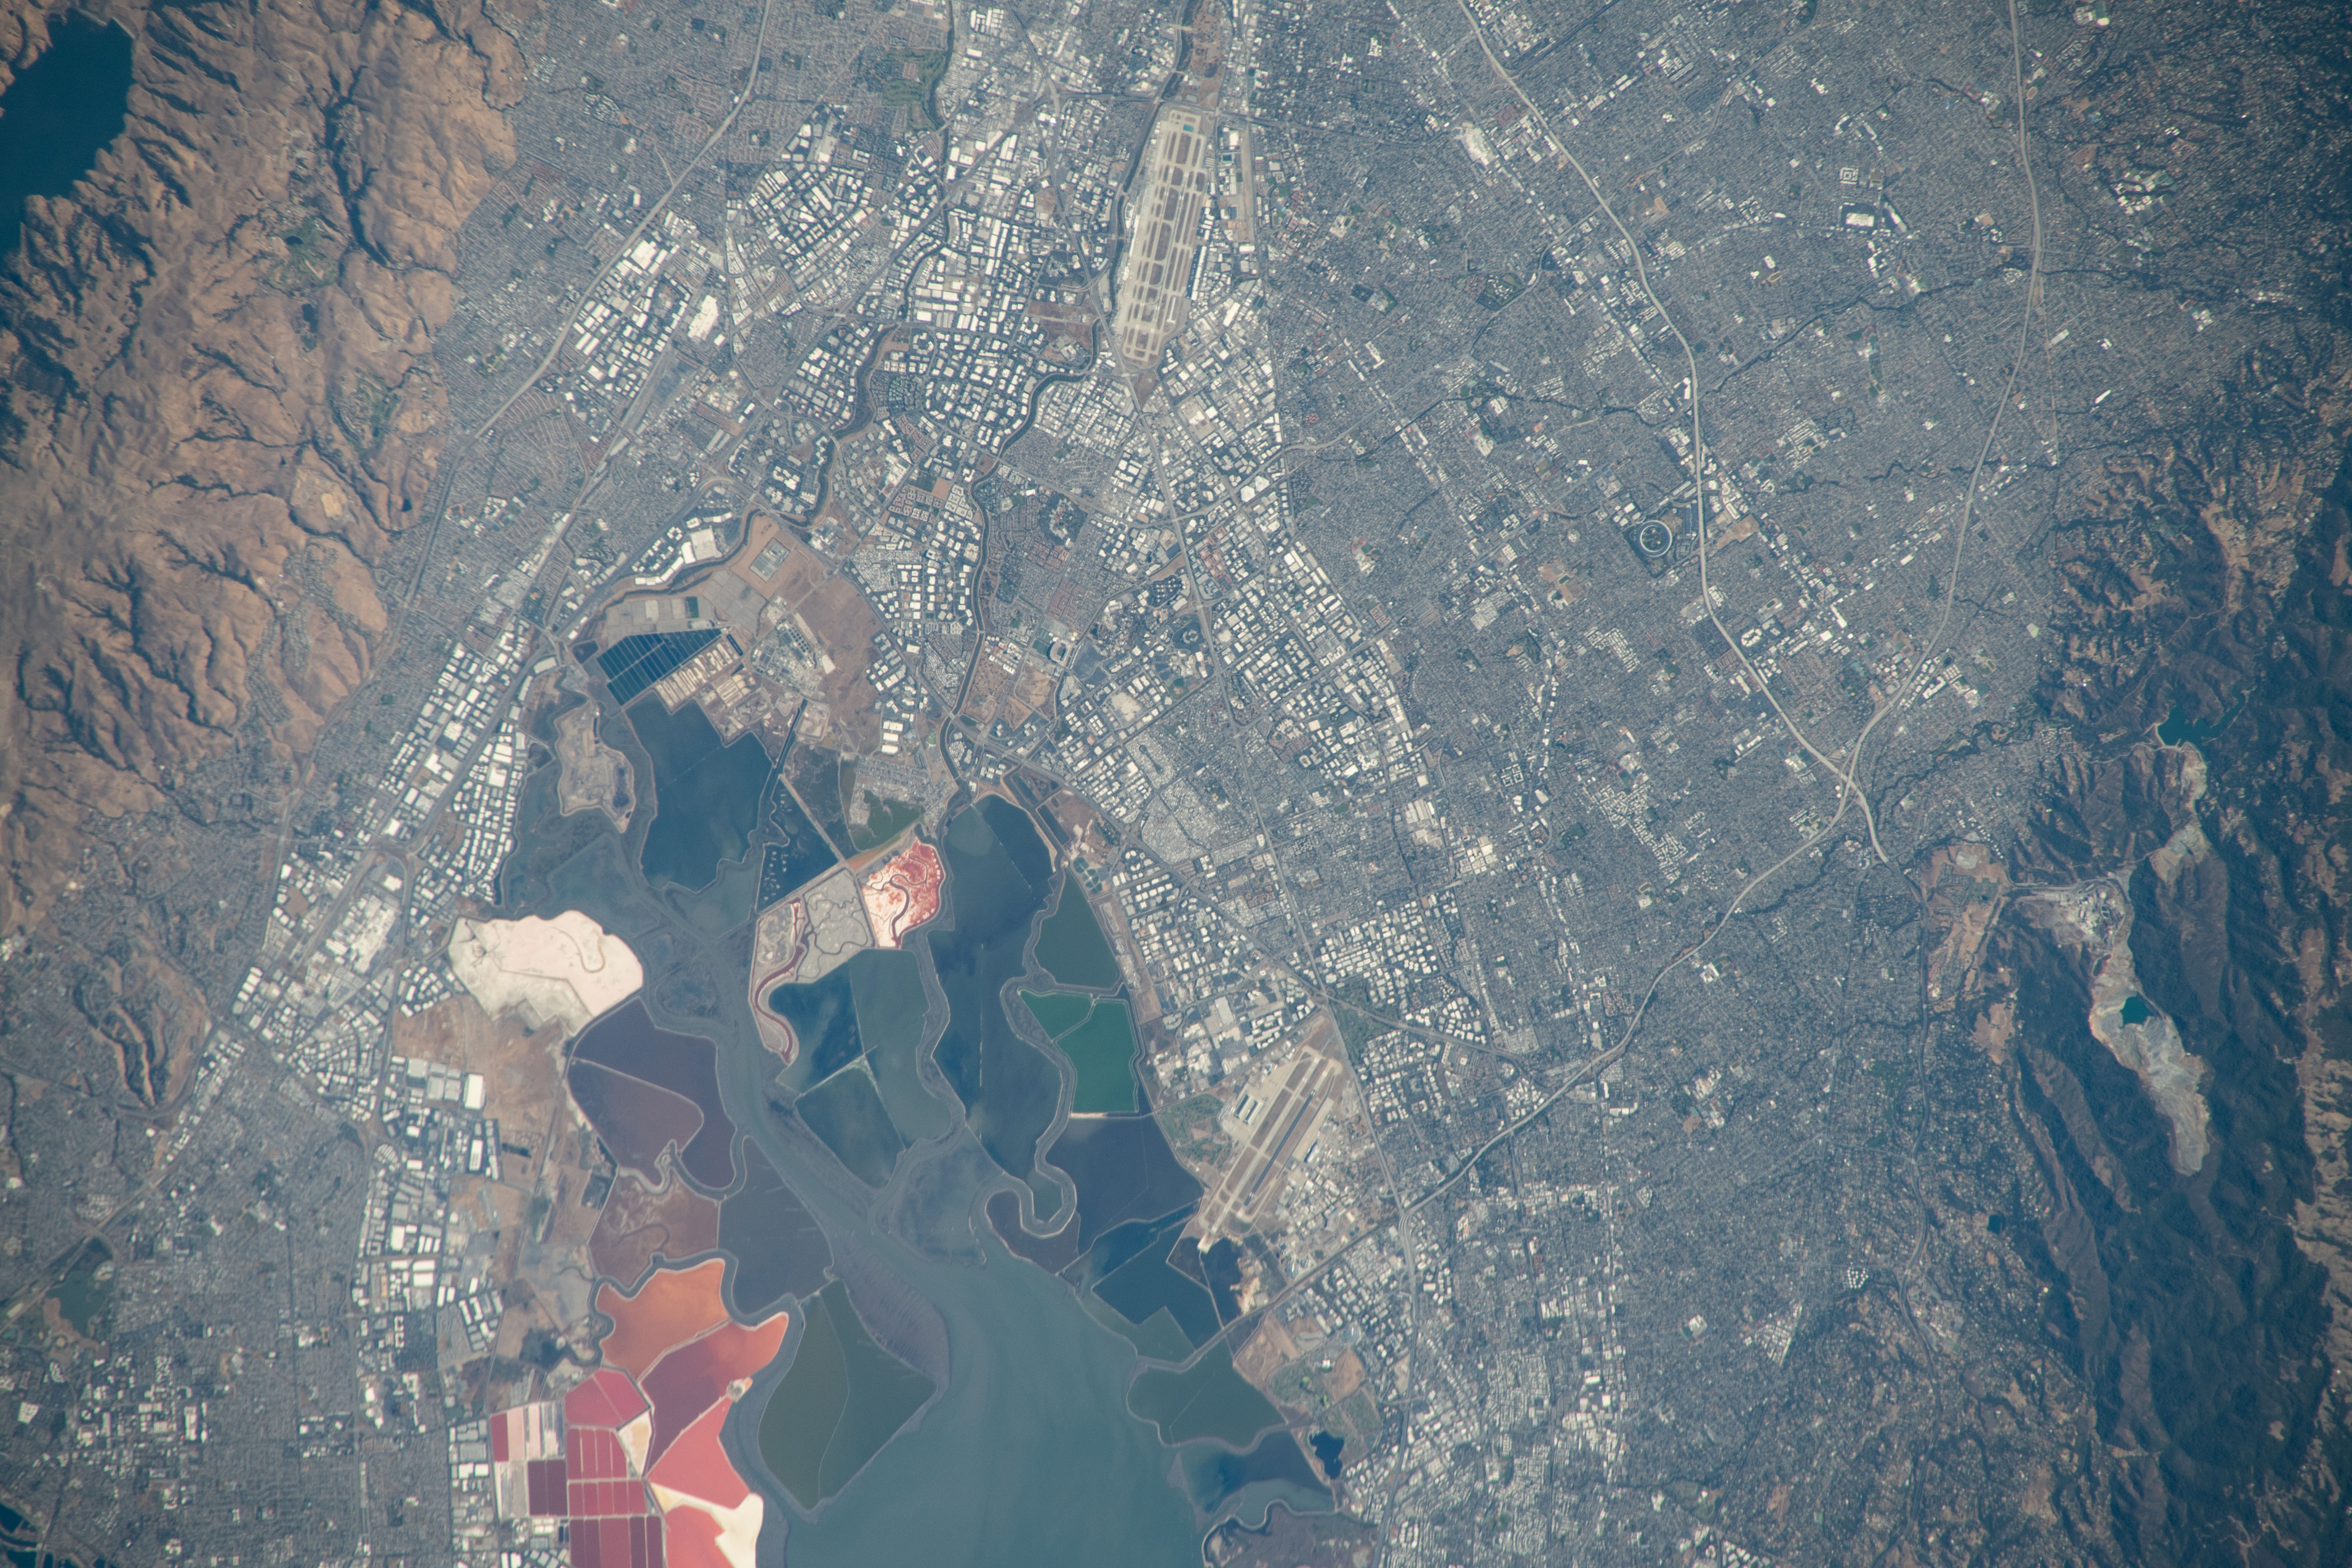 A view of Santa Clara, California, from space. San Francisco Bay is the focal point of the image, and Levi's Stadium is visible just above the bay near the center of the image. The land is a mixture of reds and greens, the mountains are brown, the water is a mixture of blues and greens, and the city areas appear gray.